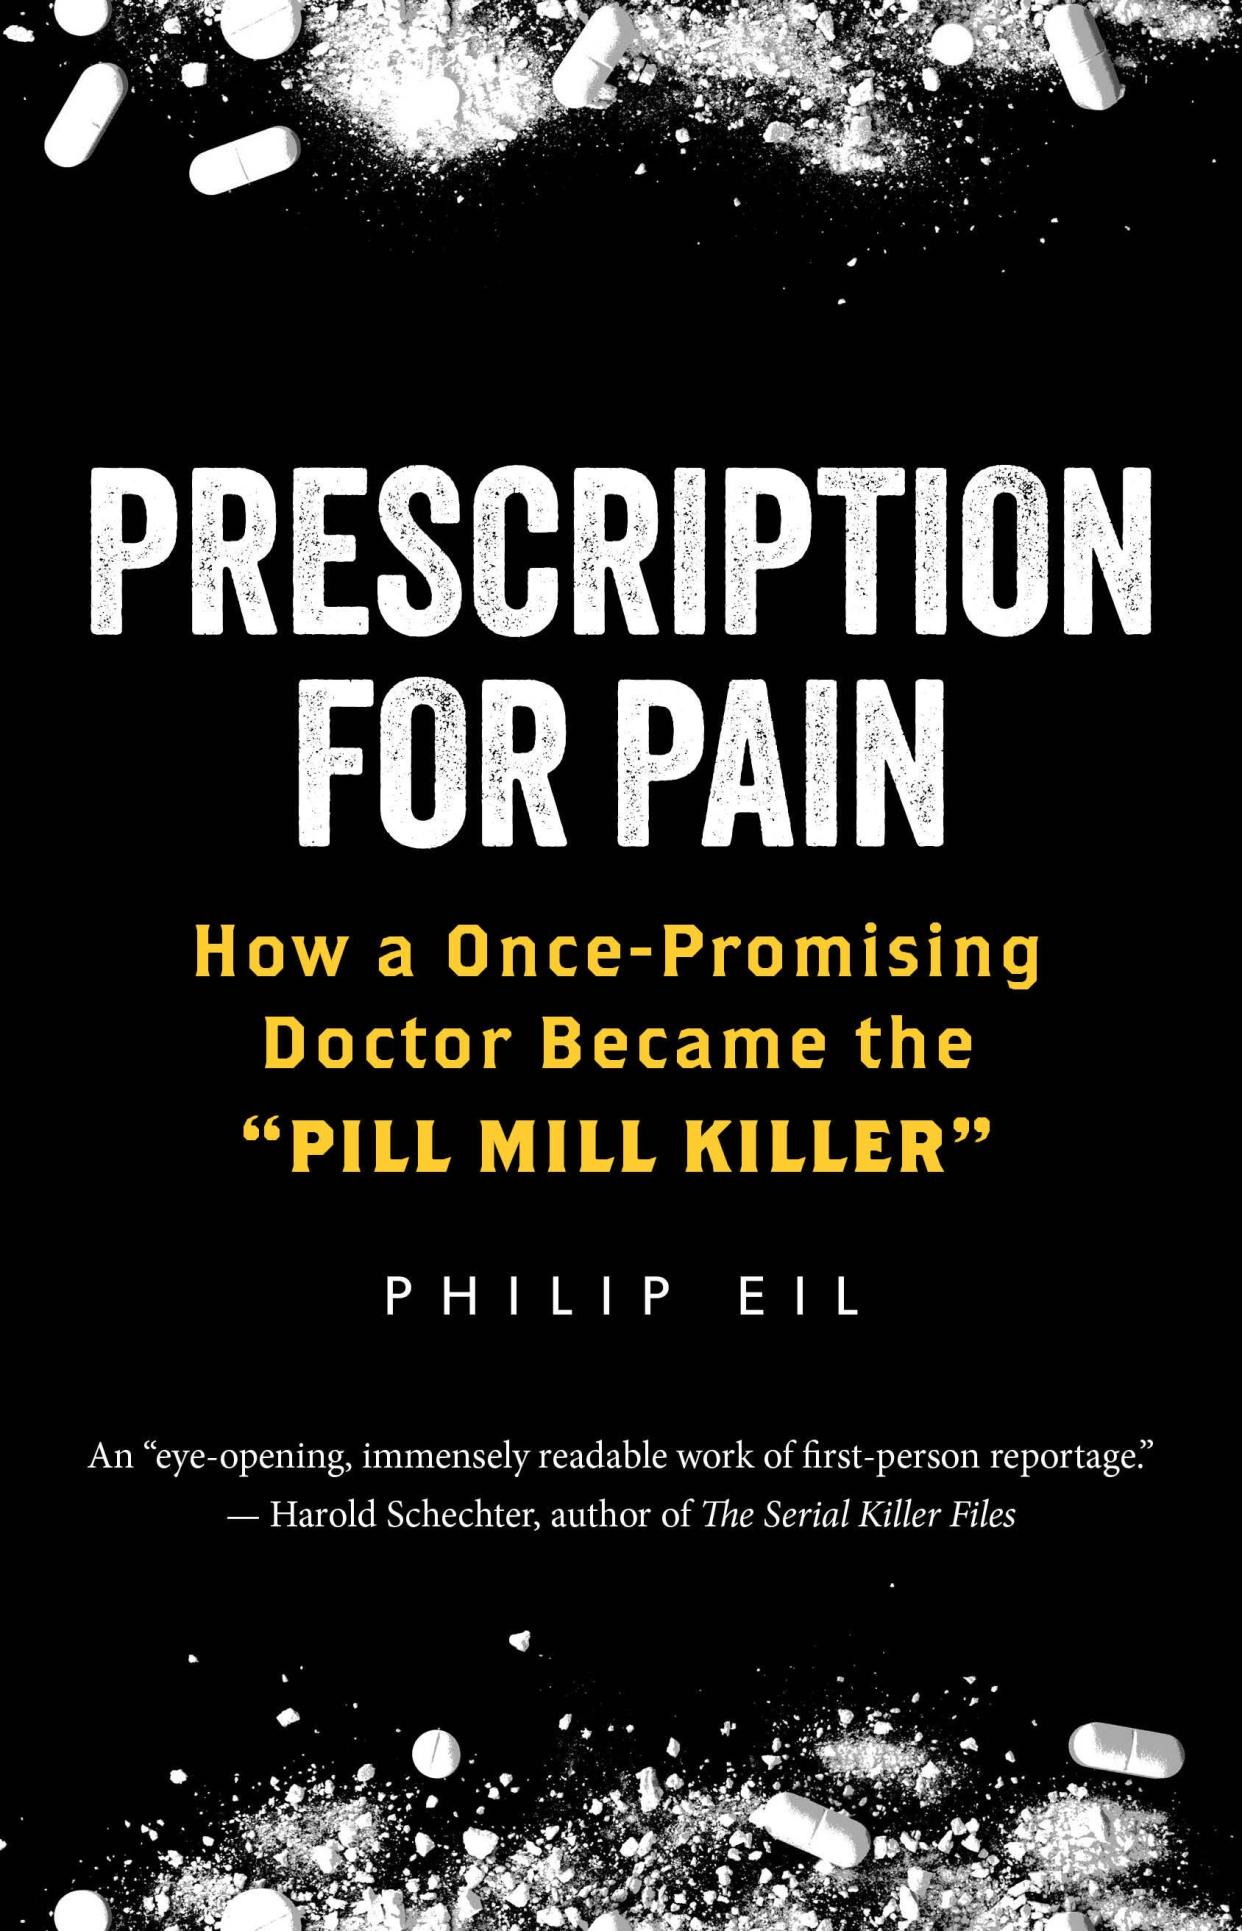 "Prescription for Pain: How a Once-promising Doctor Became the 'Pill Mill Killer.'"